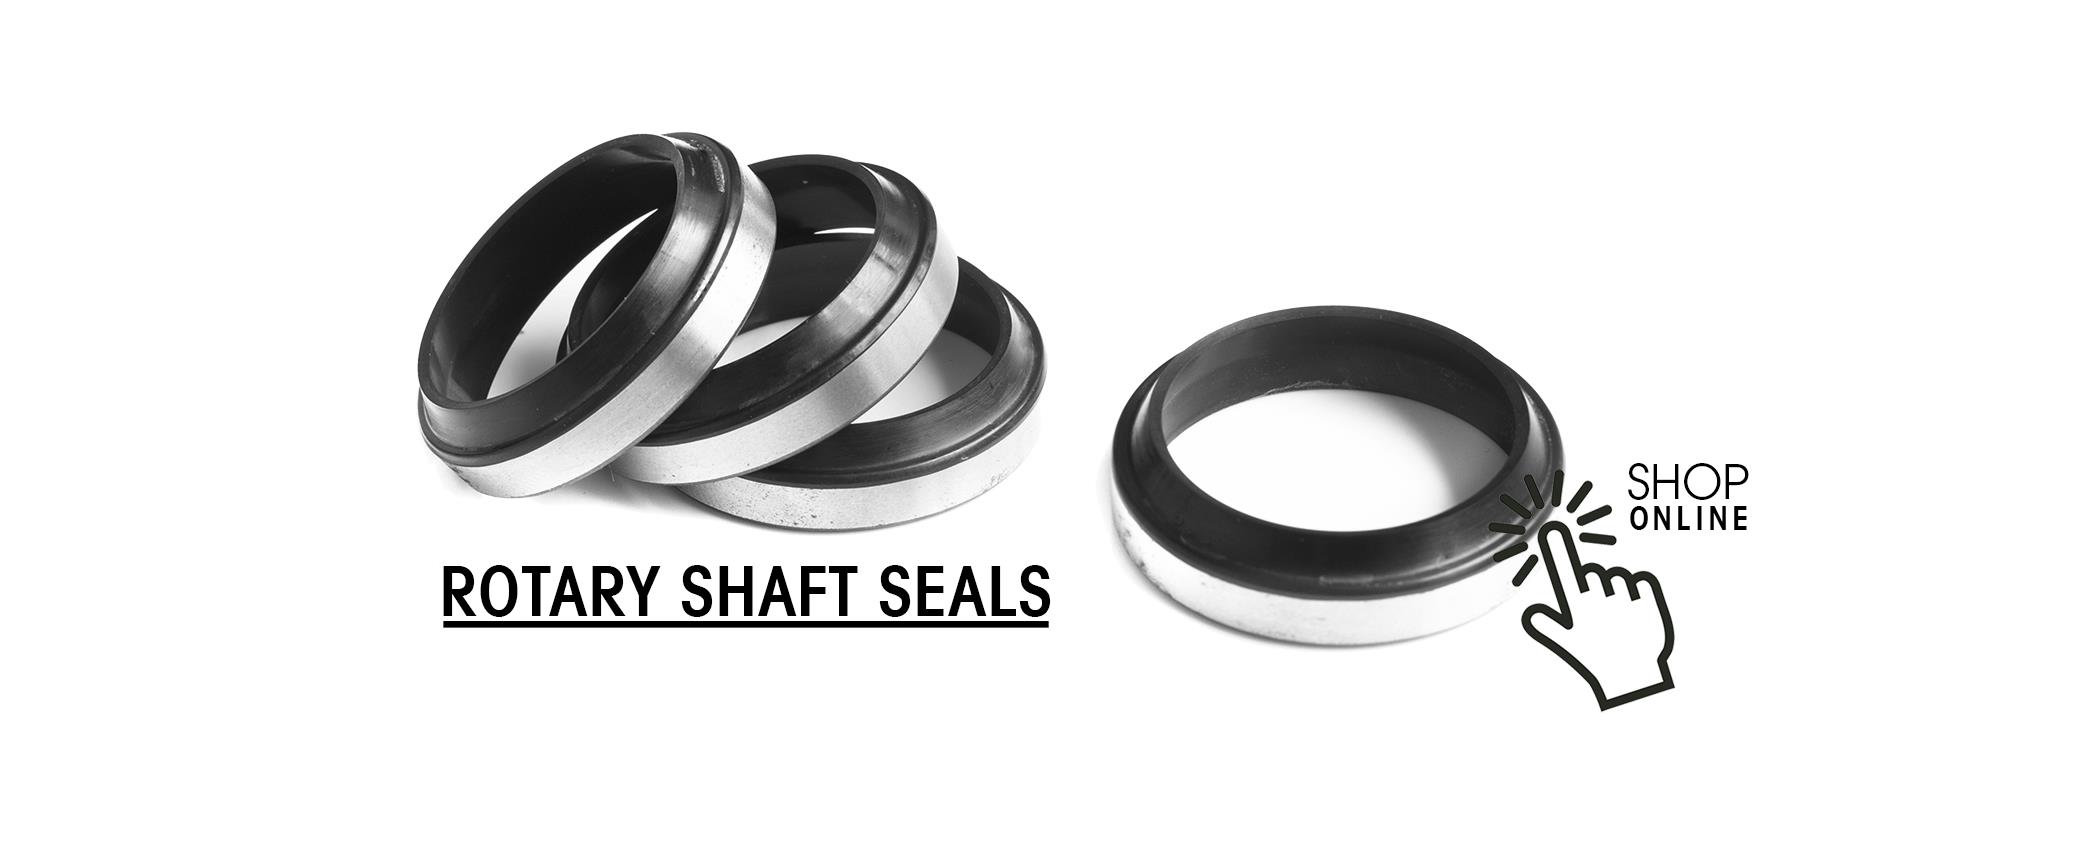 Rotary Shaft Seals, the best gaskets for high speed movement - JIOrings